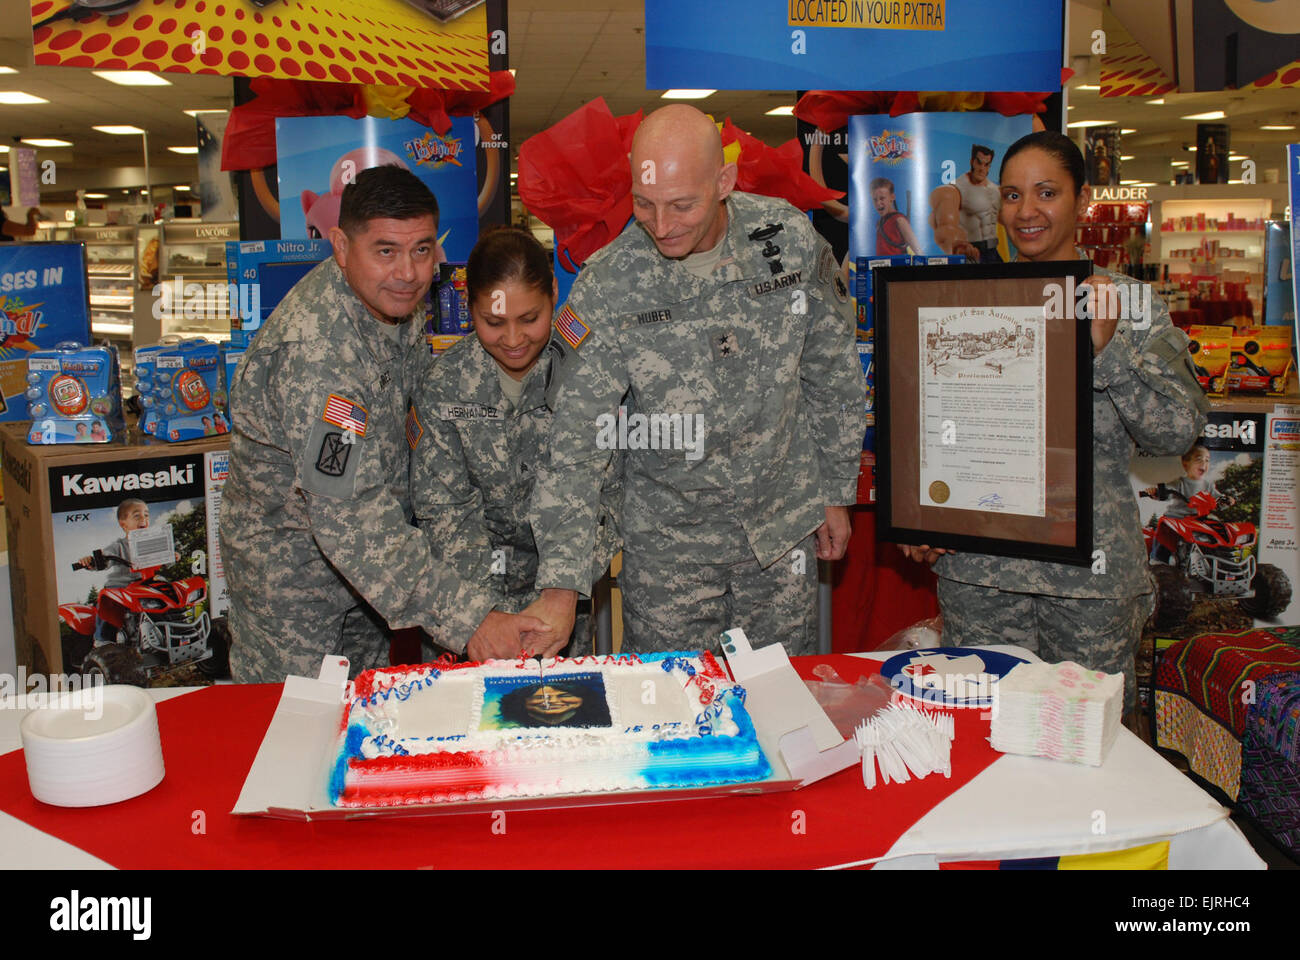 During this year's Hispanic Heritage Month celebrations left to right Command Sgt. Maj.  Armando Ramirez, Army South command sergeant major; Sgt. Esmeralda Hernandez, Special  Troops Battalion; Maj. Gen. Keith M. Huber, Army South commander; and Sgt. 1st Class Mina Vargas, 470th Military Intelligence initiate the celebrations with a cake-cutting ceremony at Fort Sam Houston, Texas, Sept. 15.          U.S. Army South celebrates Hispanic Heritage Month  /-news/2009/09/29/28007-us-army-south-celebrates-hispanic-heritage-month/    Official U.S. Army  Hispanic American Heritage site  /hispanicameri Stock Photo